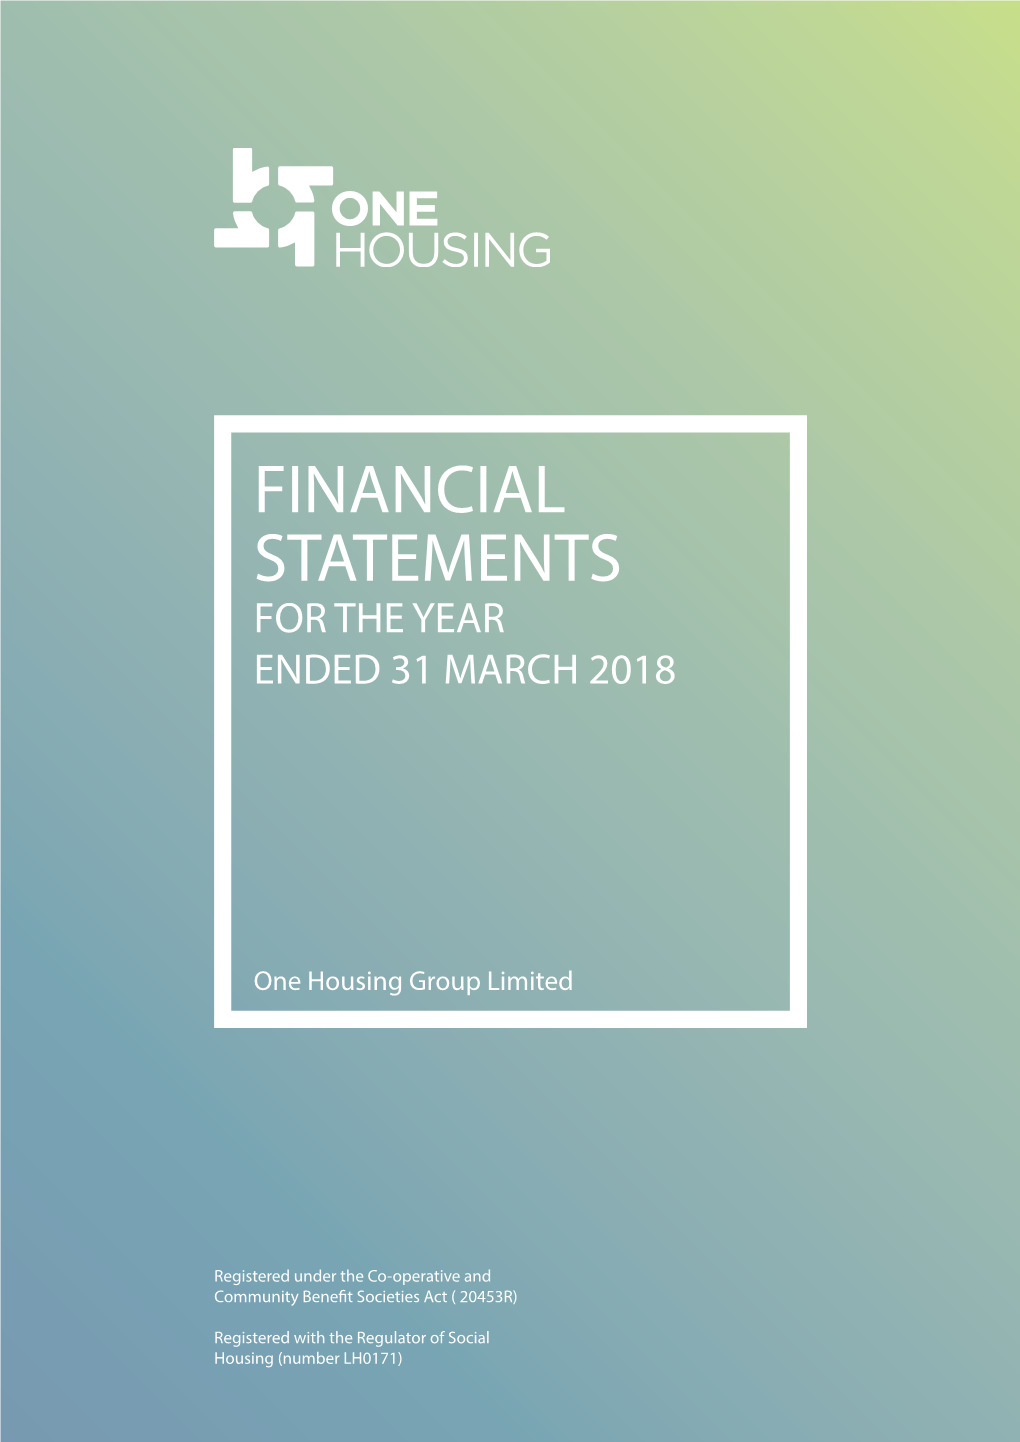 Financial Statements for the Year Ended 31 March 2018